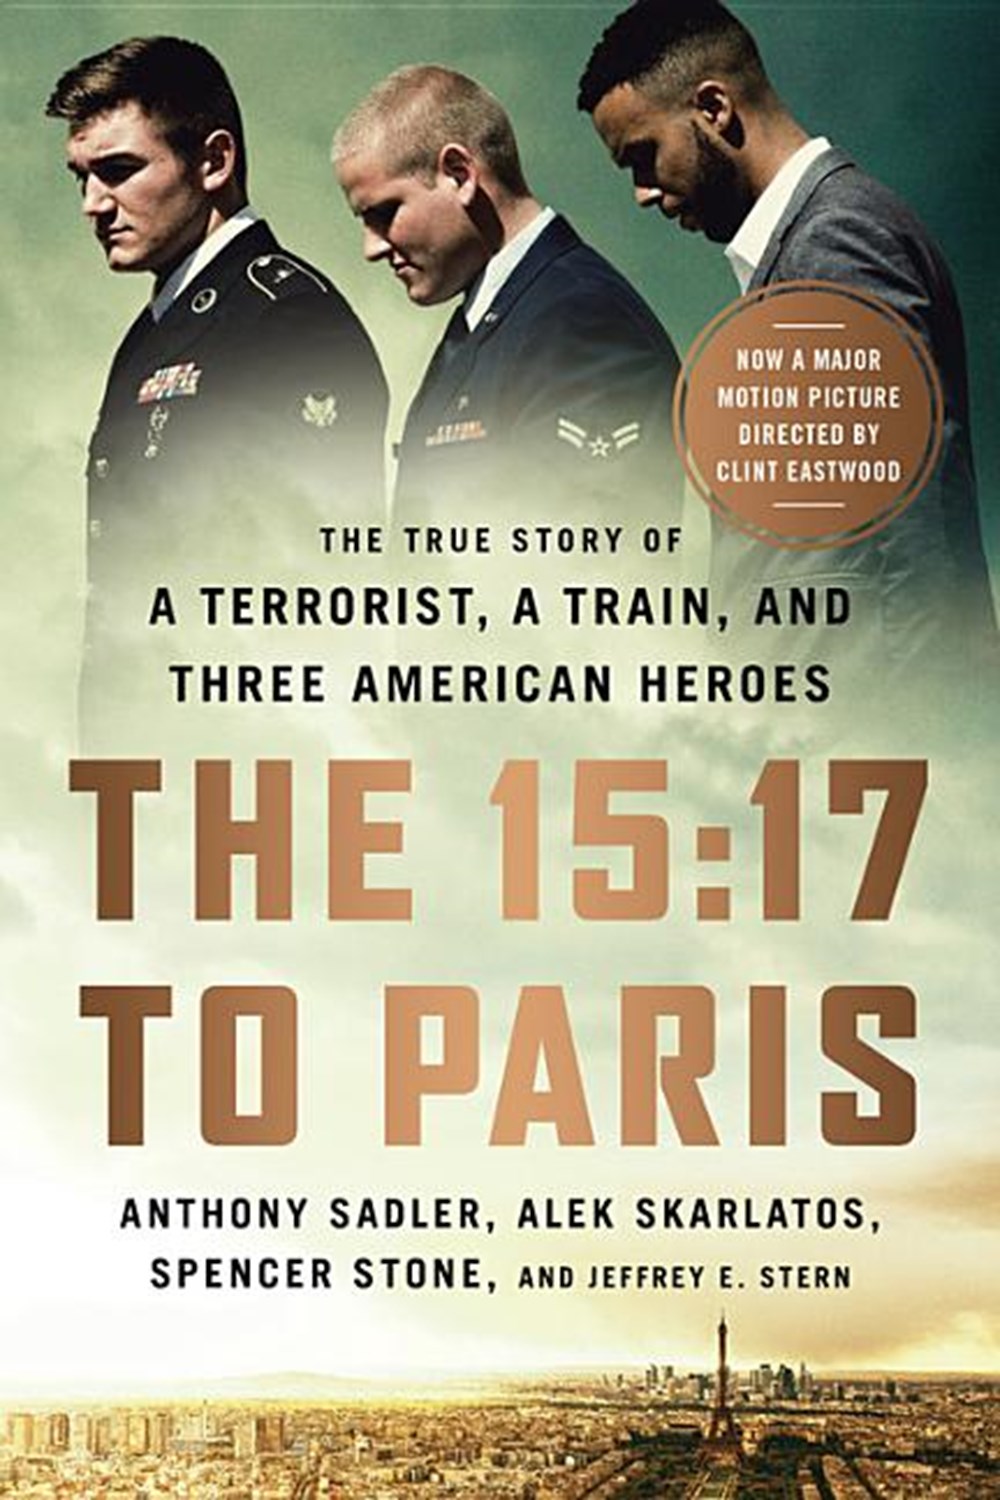 15:17 to Paris: The True Story of a Terrorist, a Train, and Three American Heroes